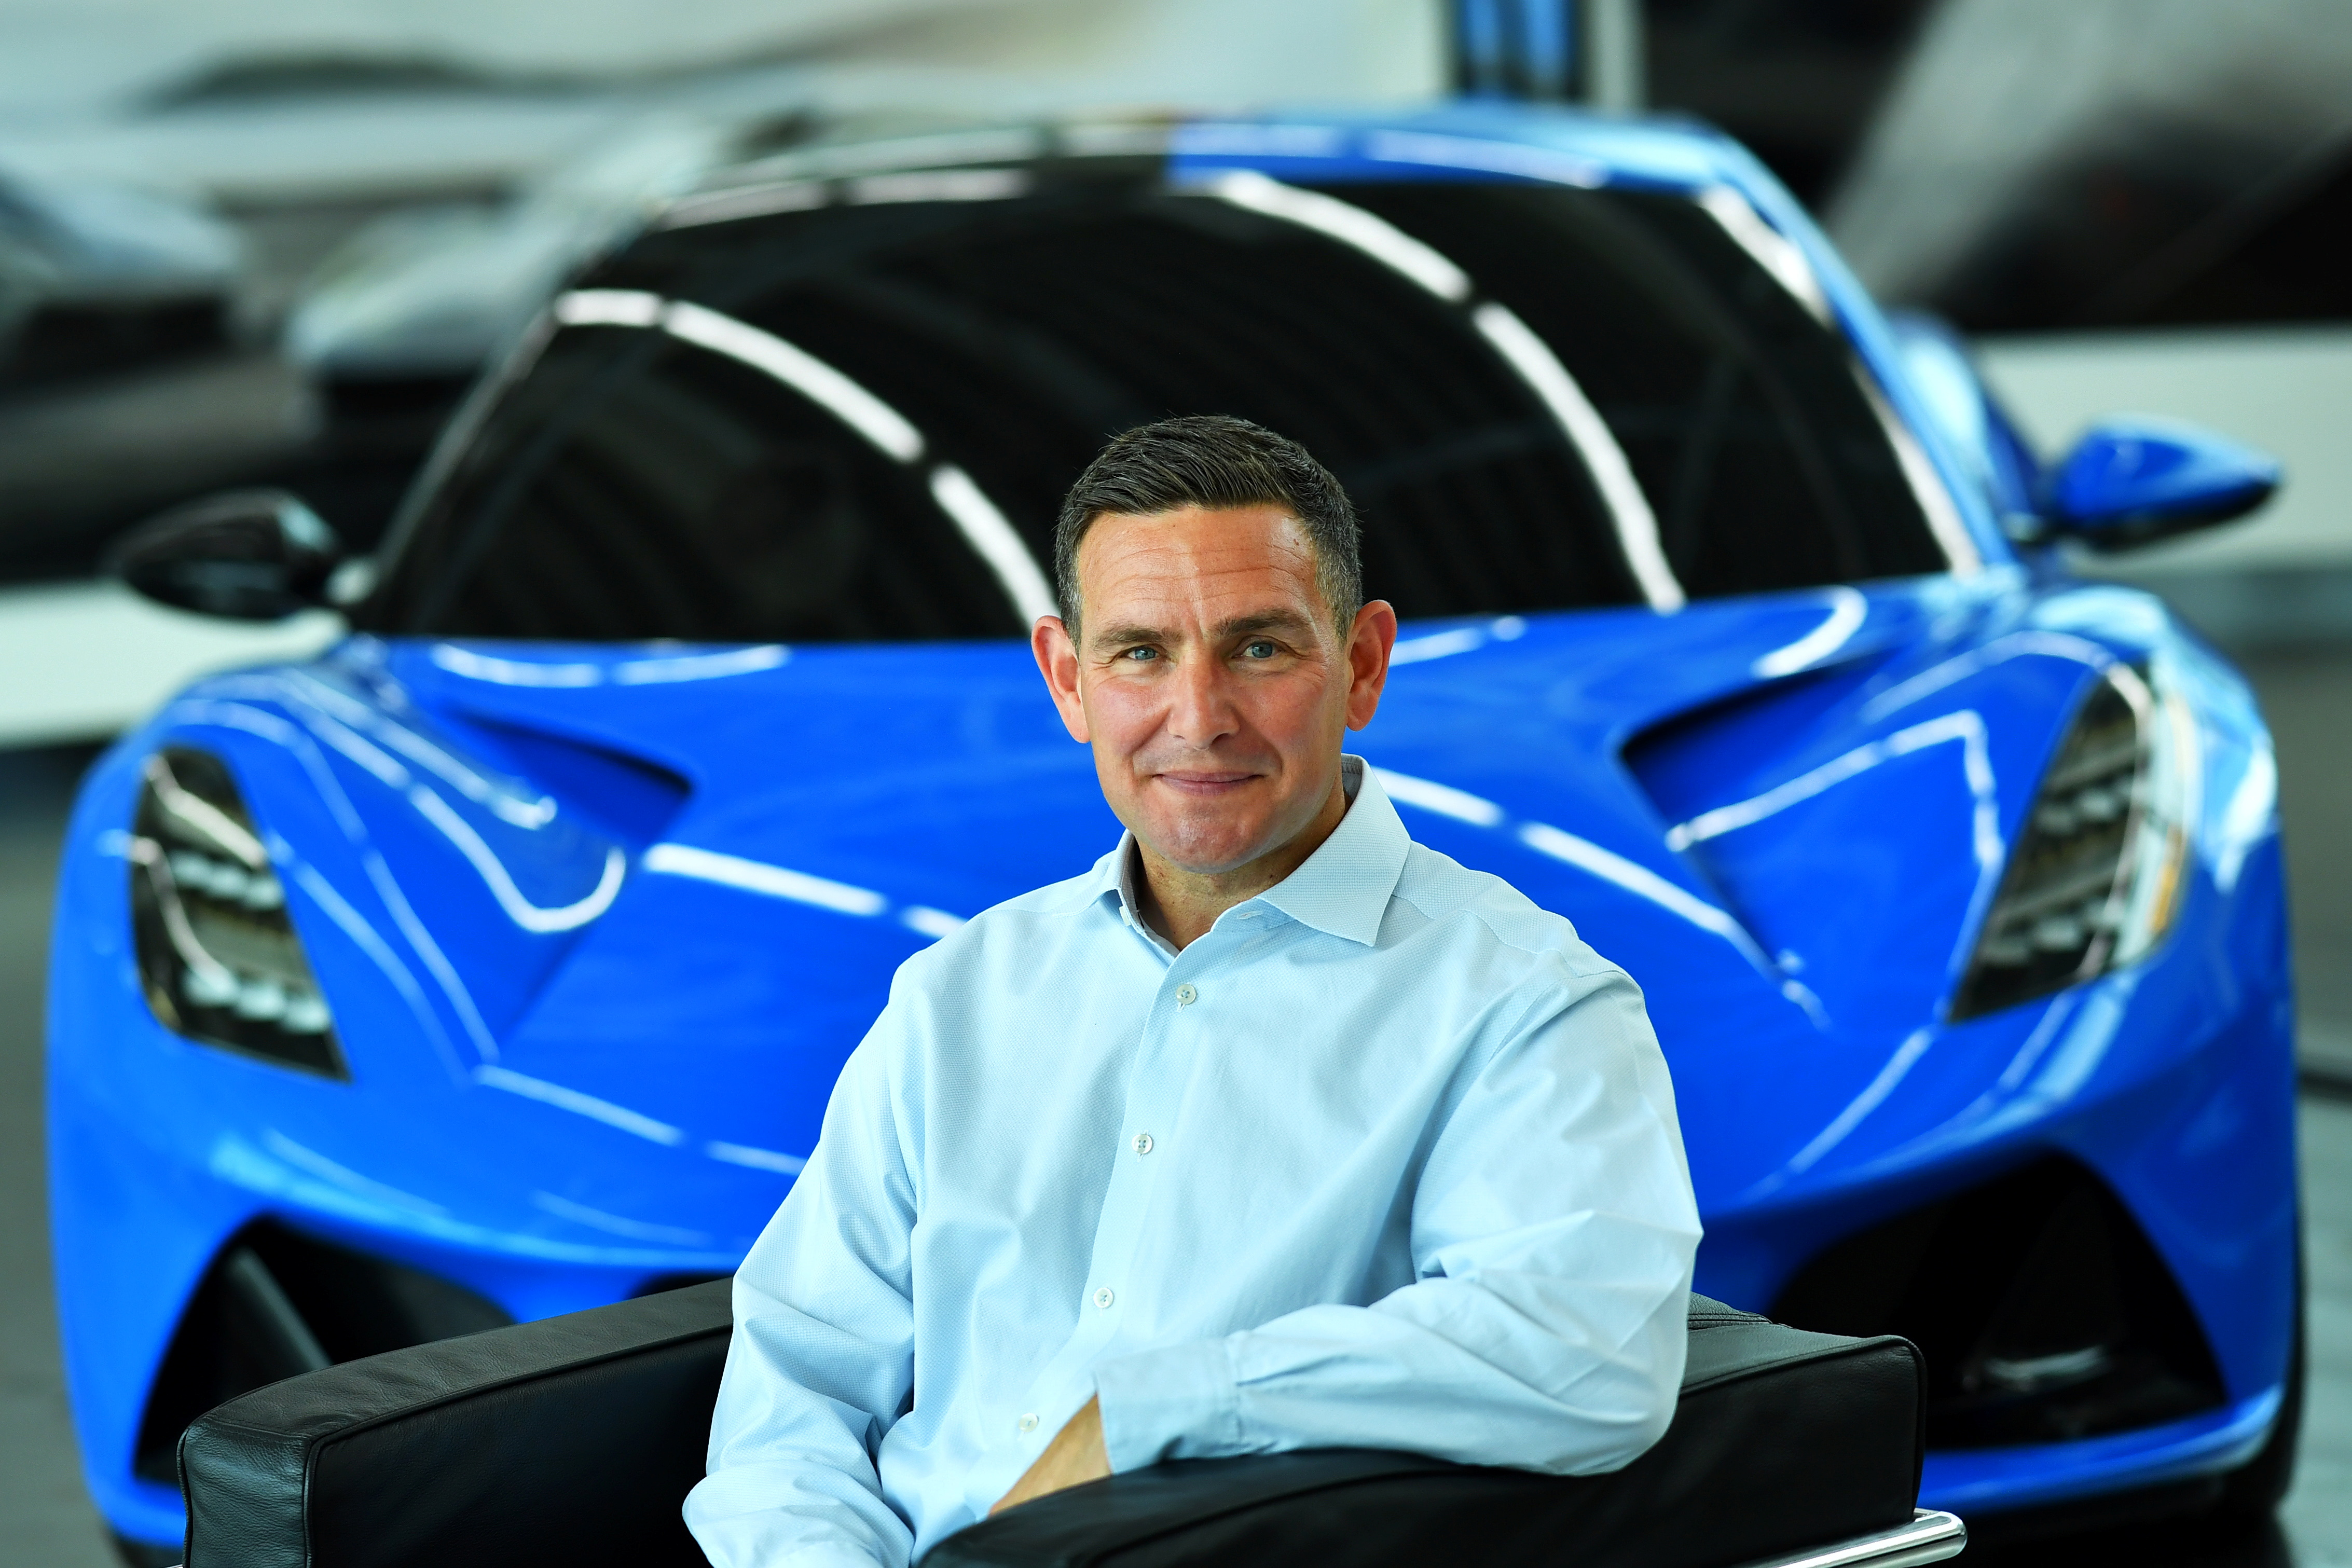 Managing Director of Lotus, Matt Windle sits in an Emira car at the company's plant in Hethel